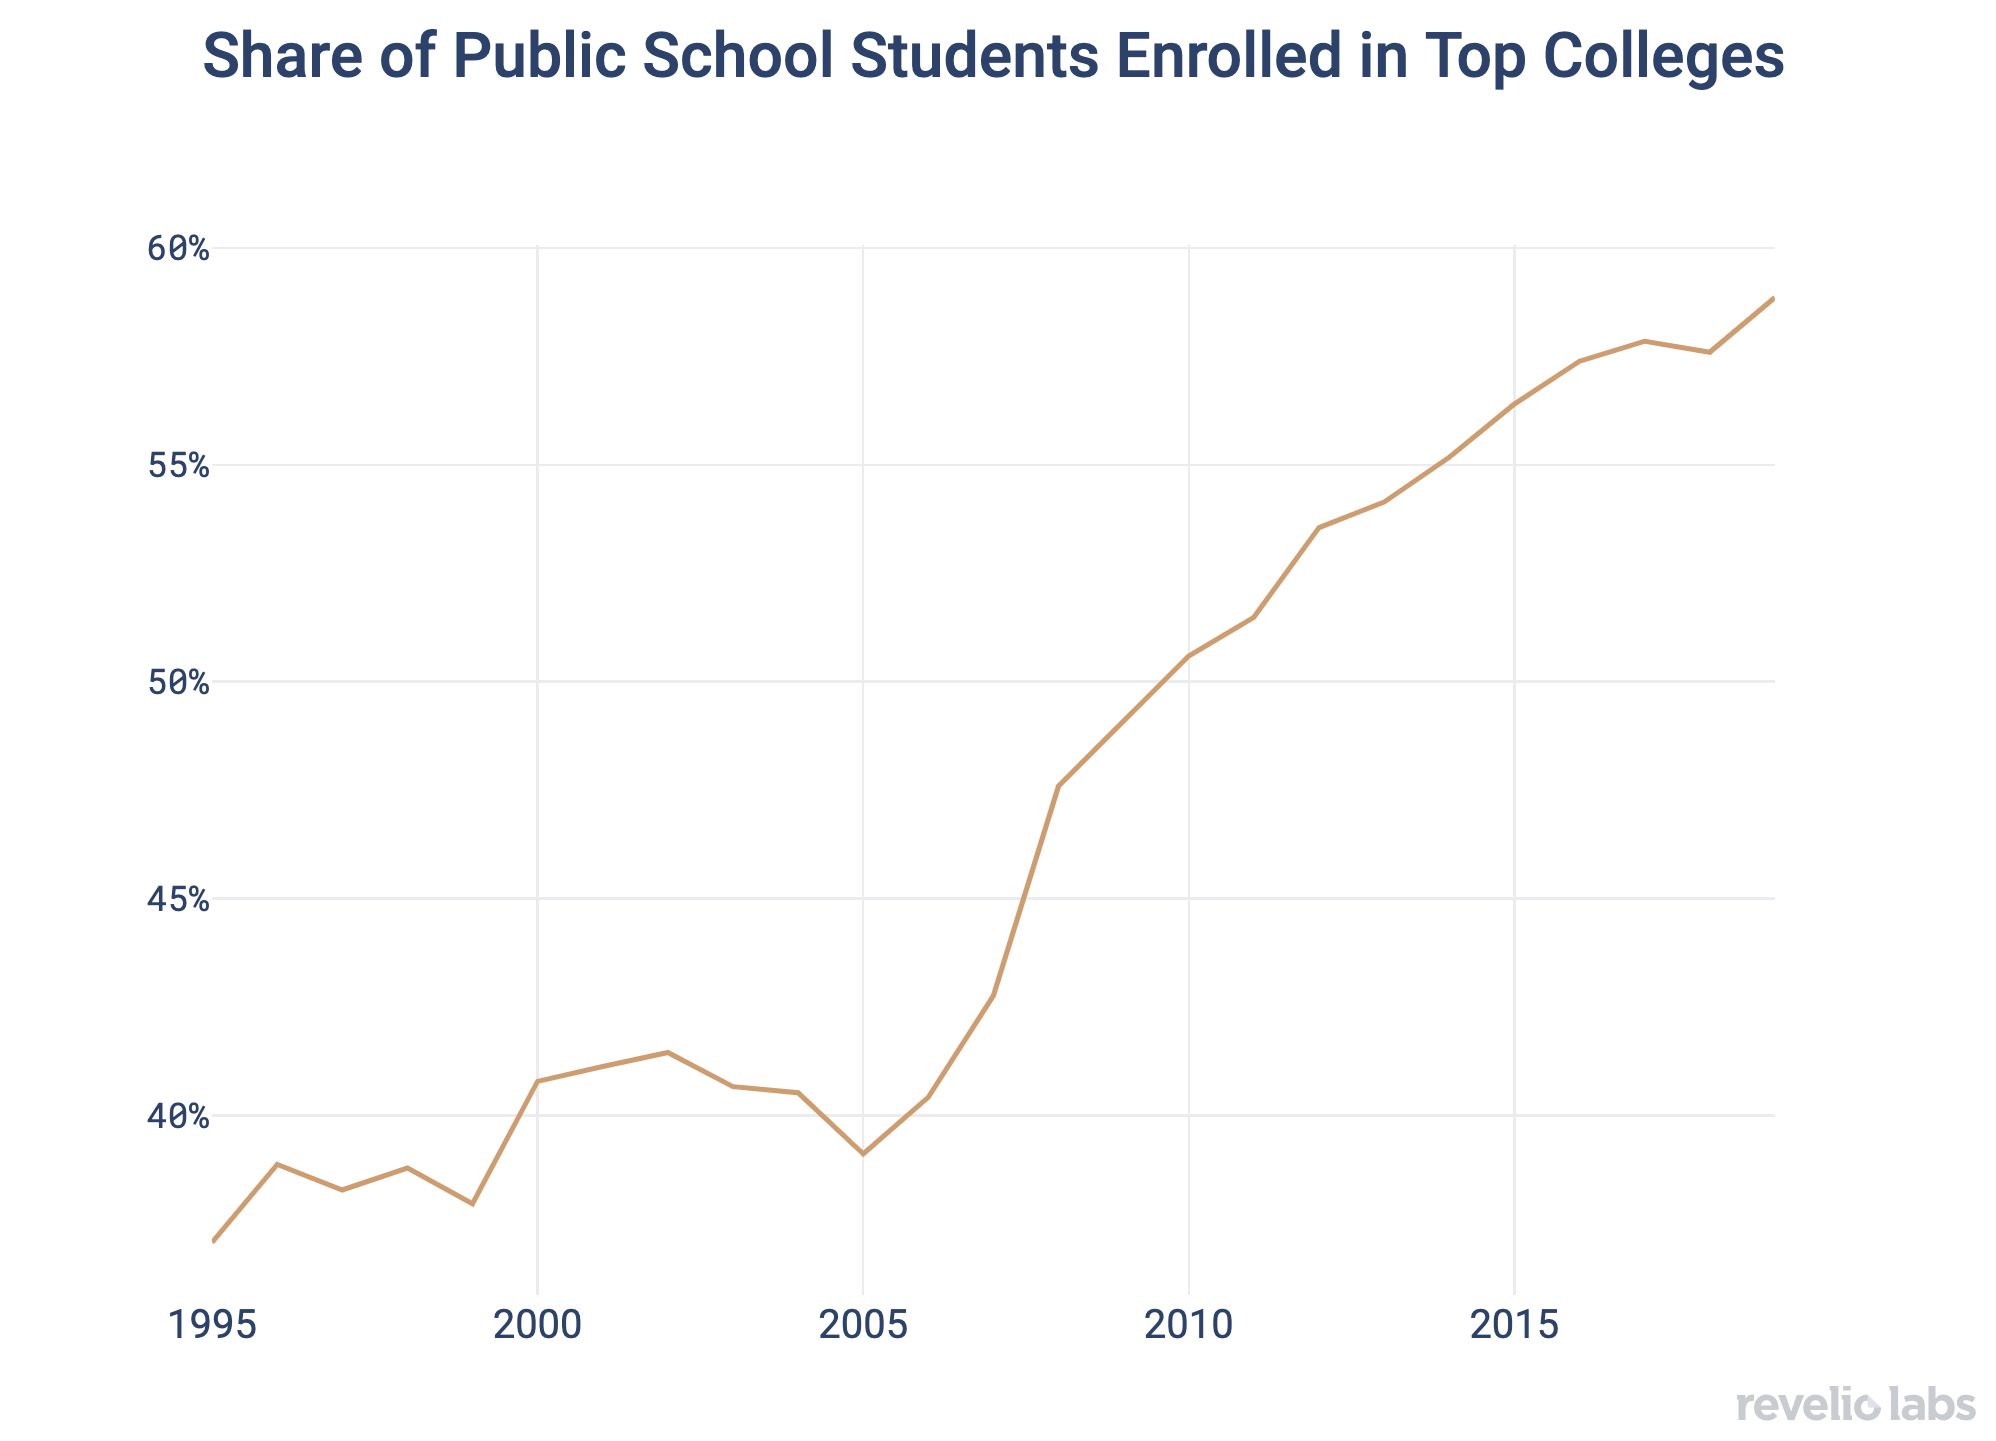 Share of Public School Students Enrolled in Top Colleges